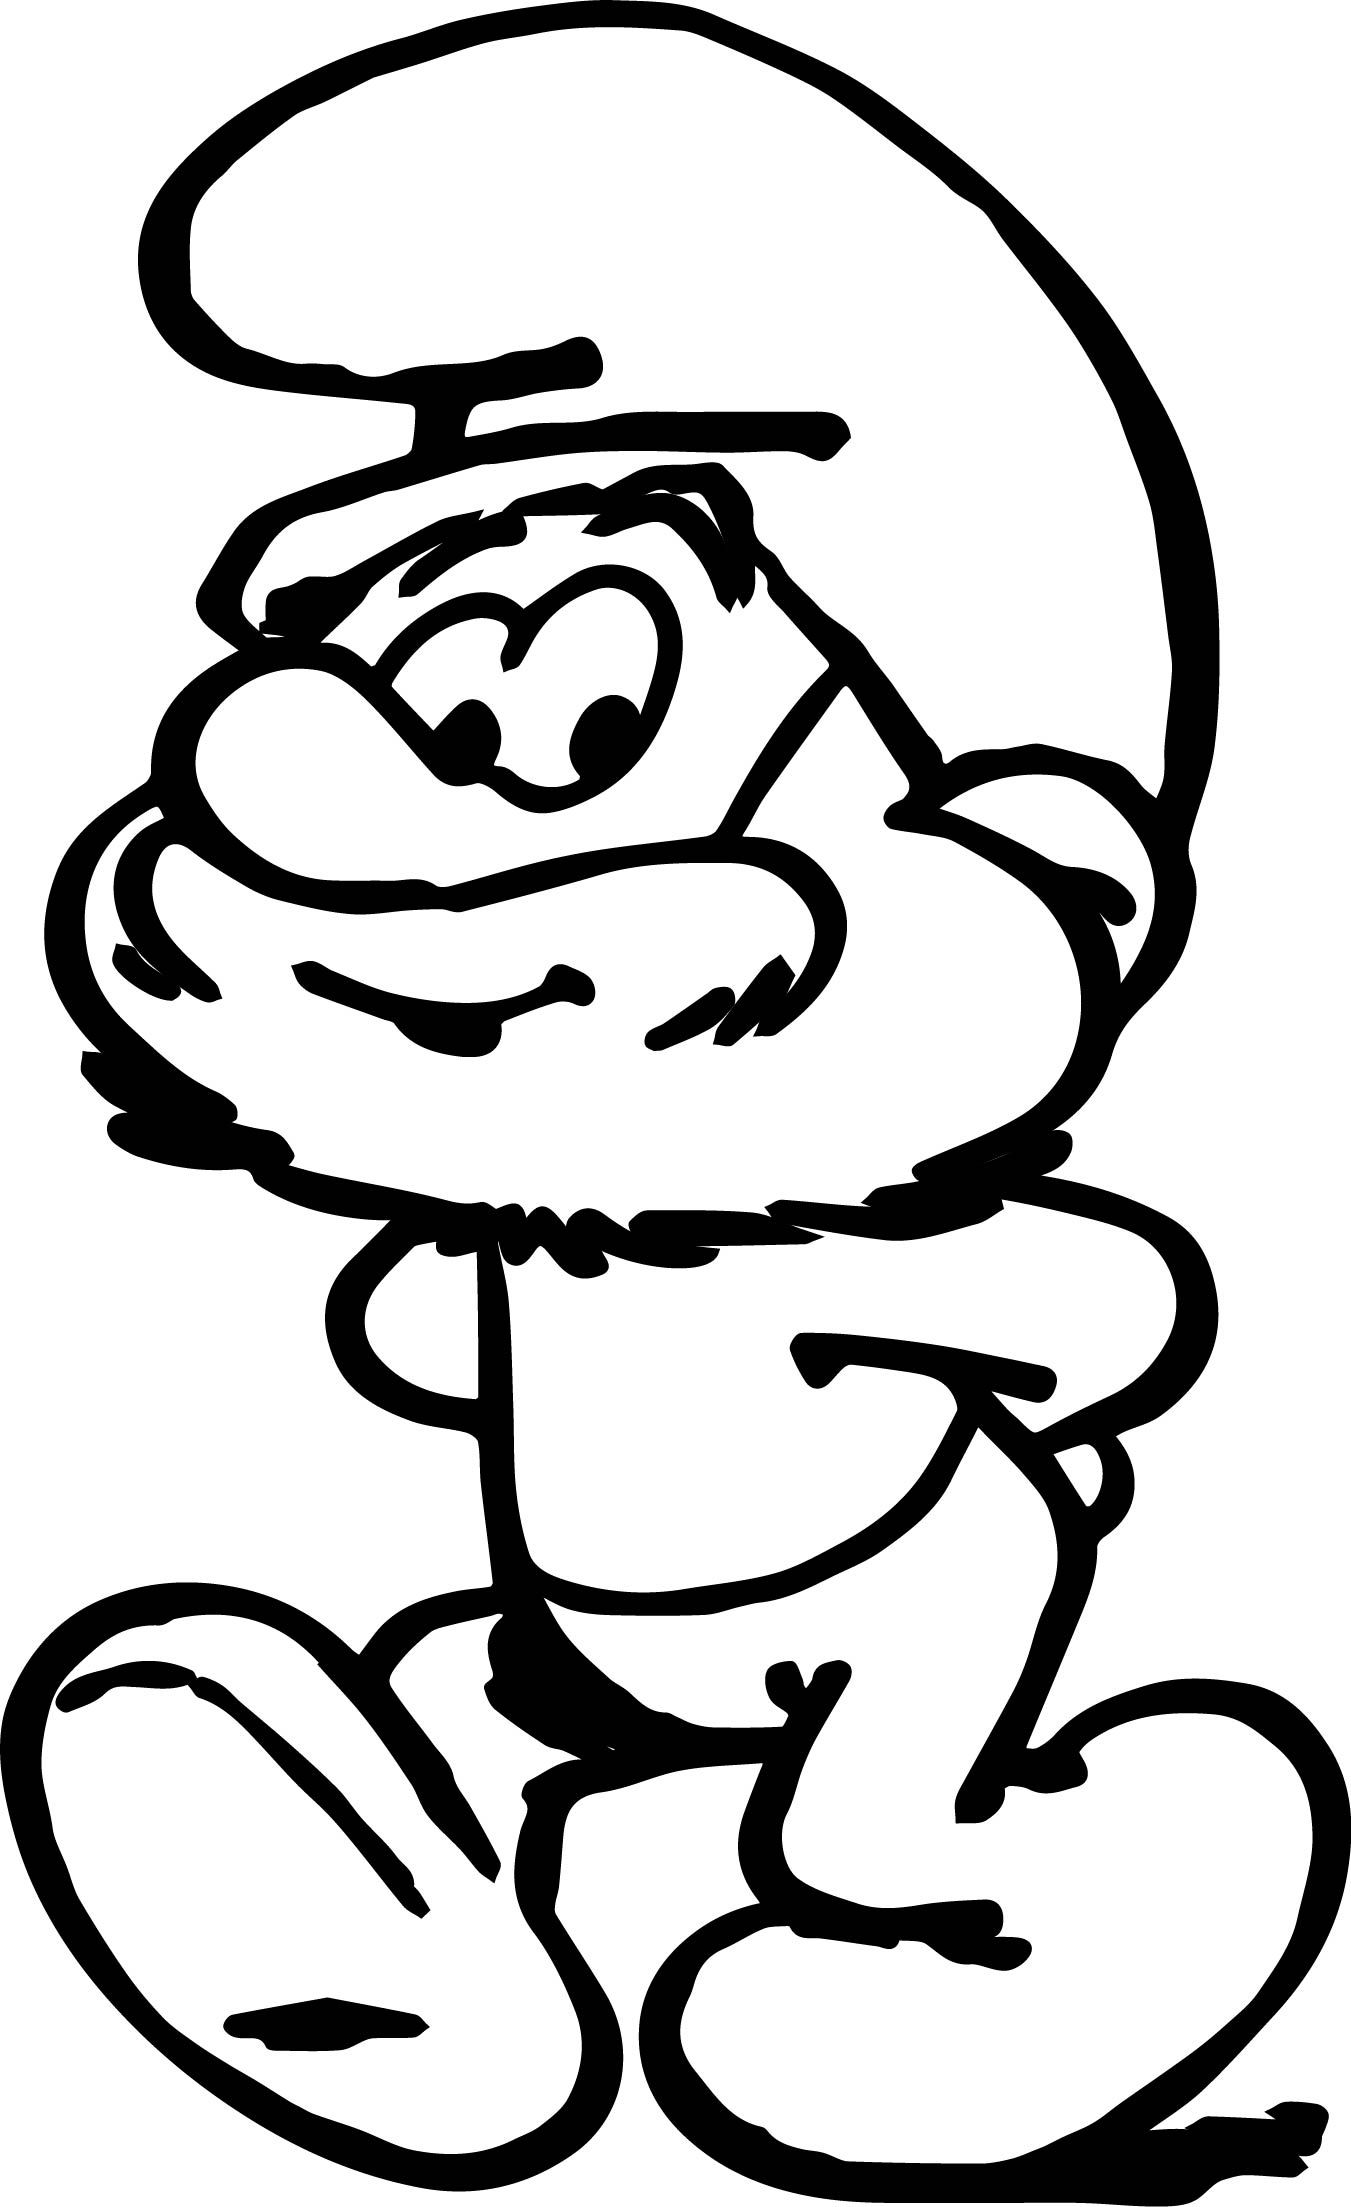 Papa smurf coloring pages cartoon coloring pages coloring pages coloring pages to print